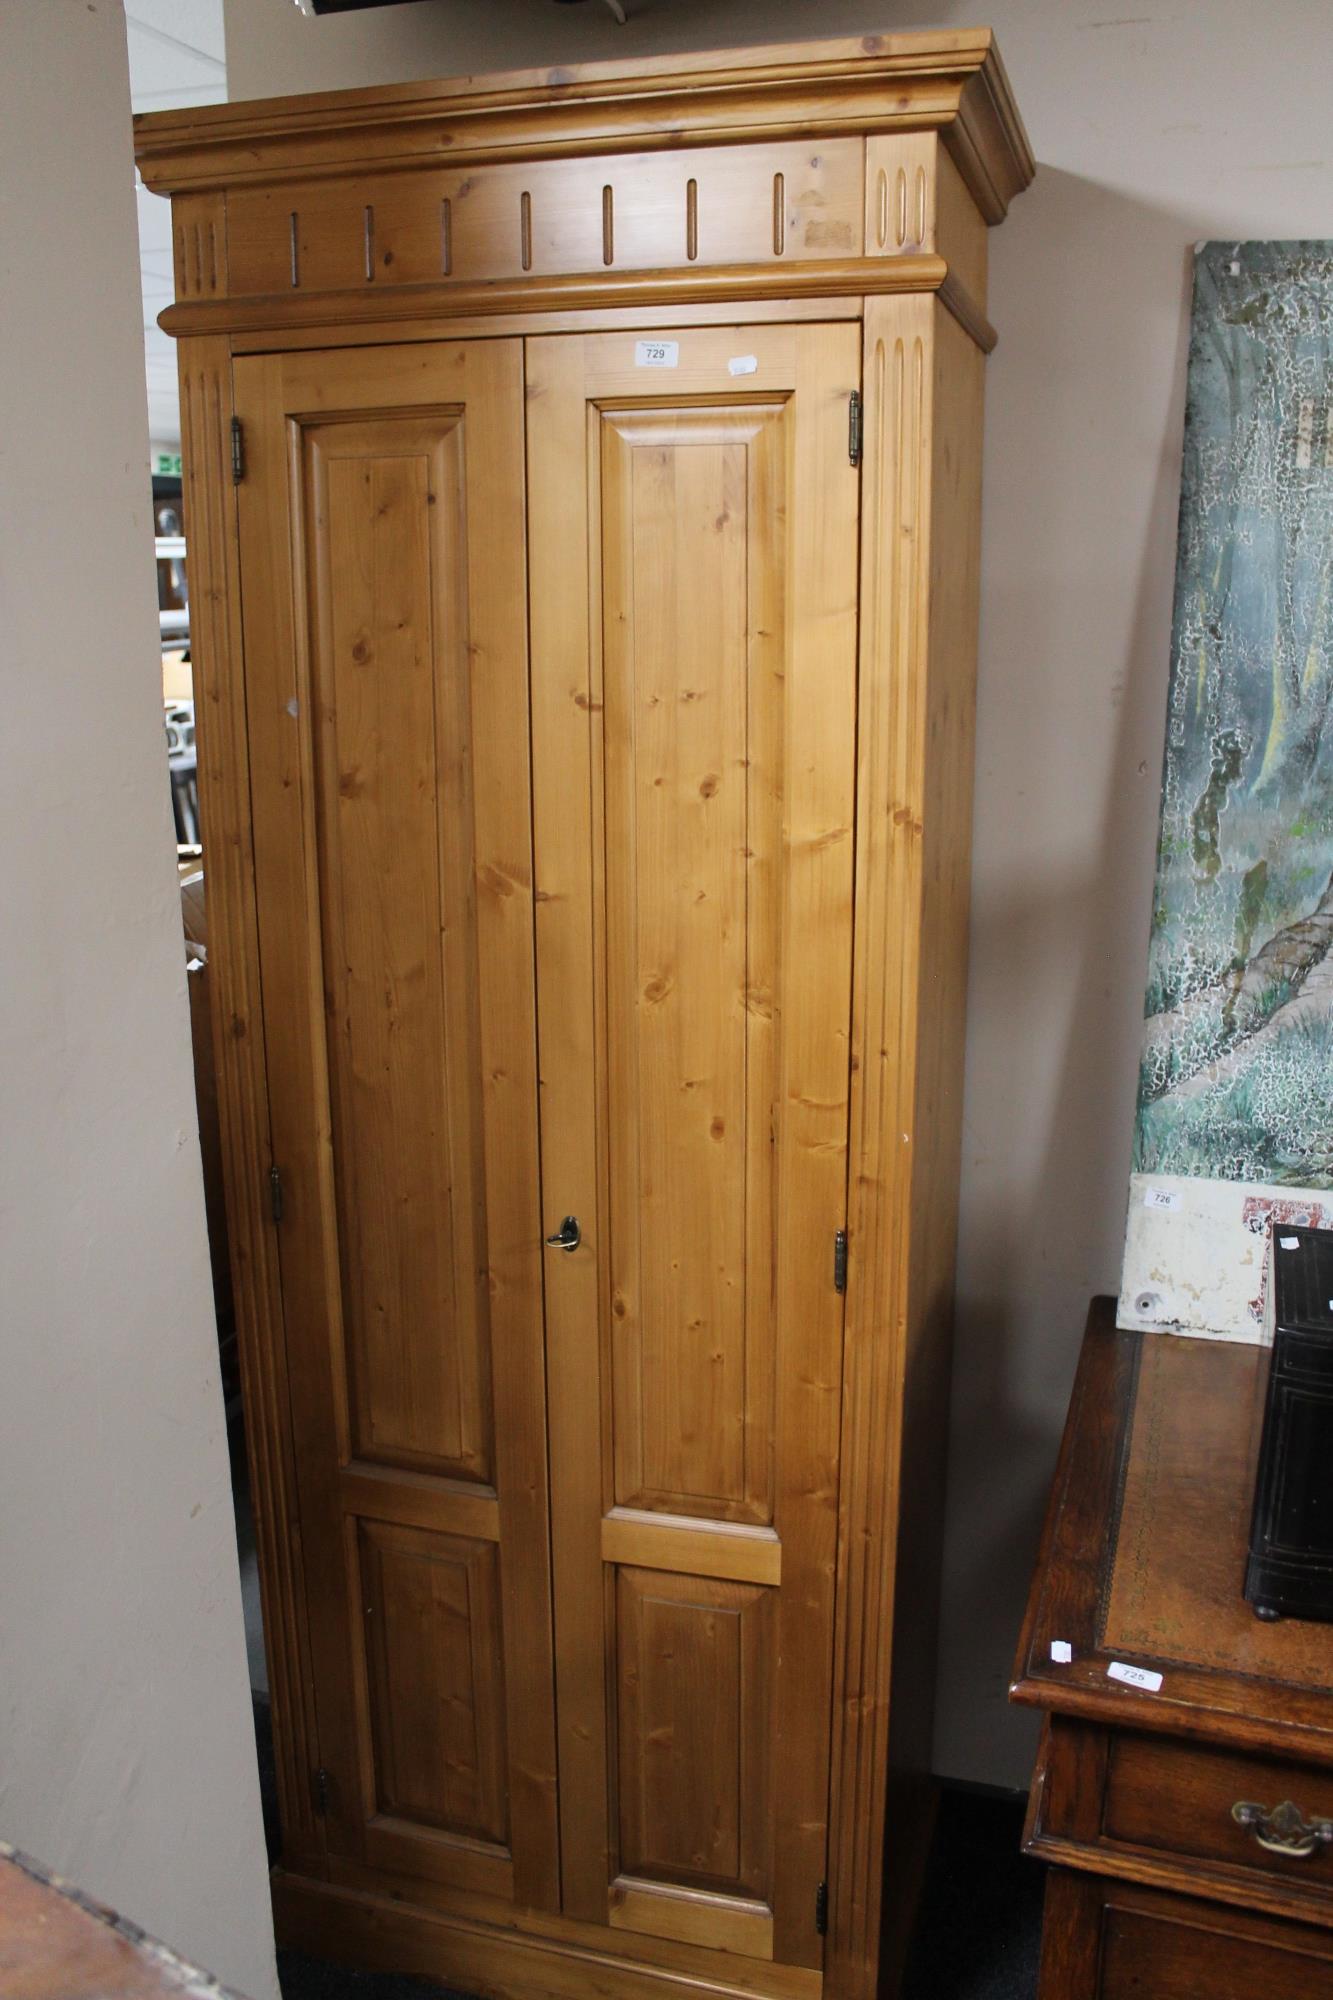 A pine double door cabinet fitted with shelves